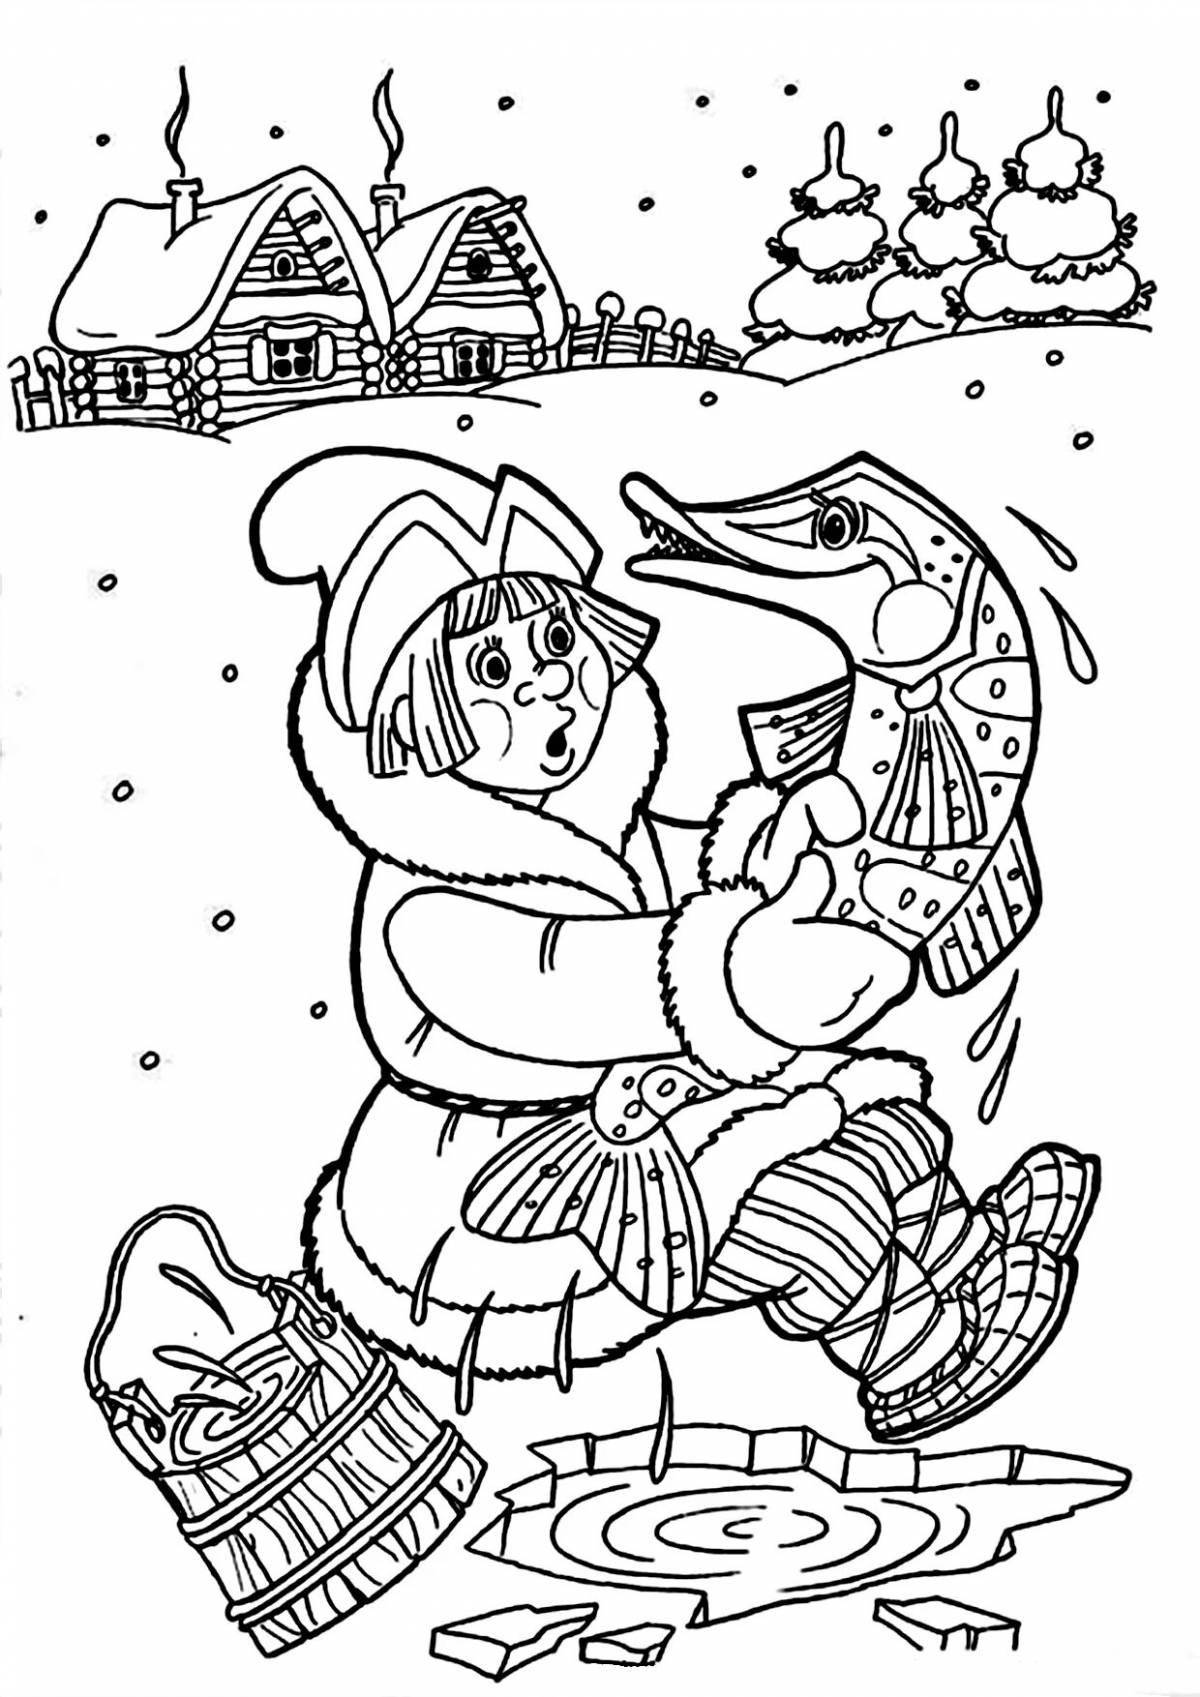 Playful winter fairy tale coloring book